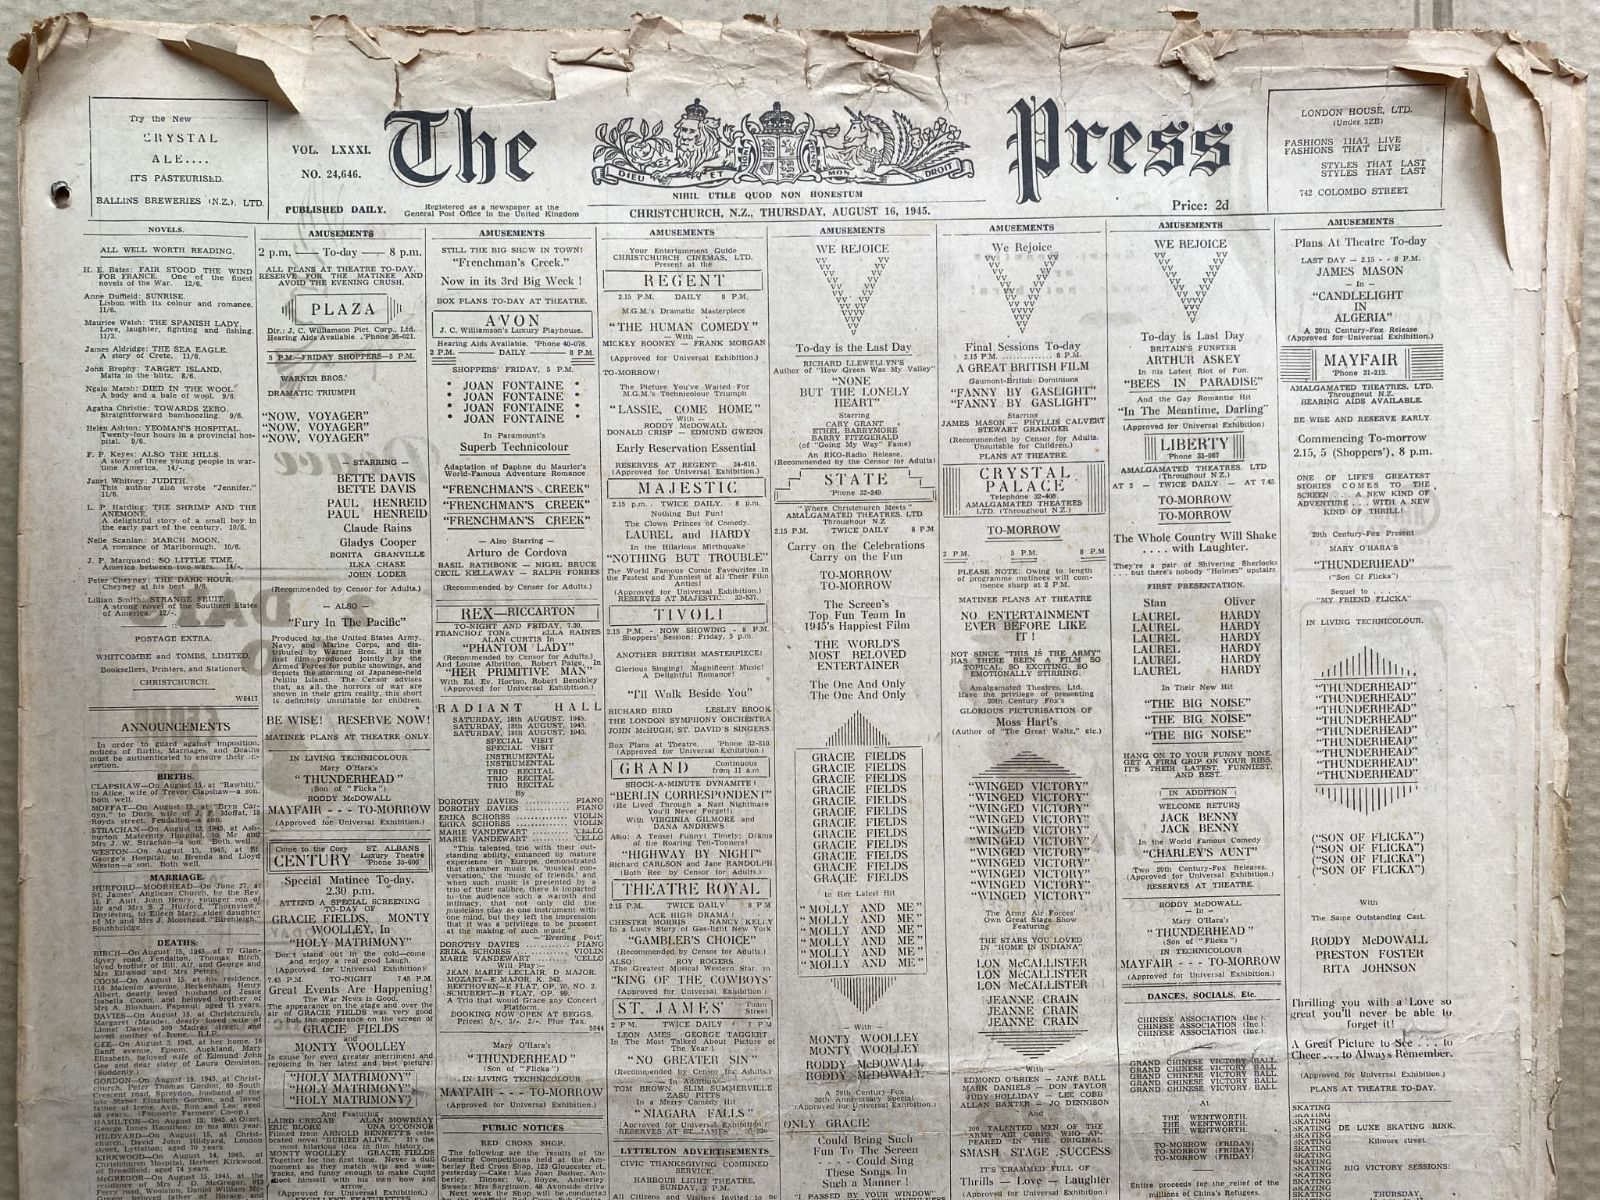 OLD NEWSPAPER: The Christchurch Press, 9 May 1945